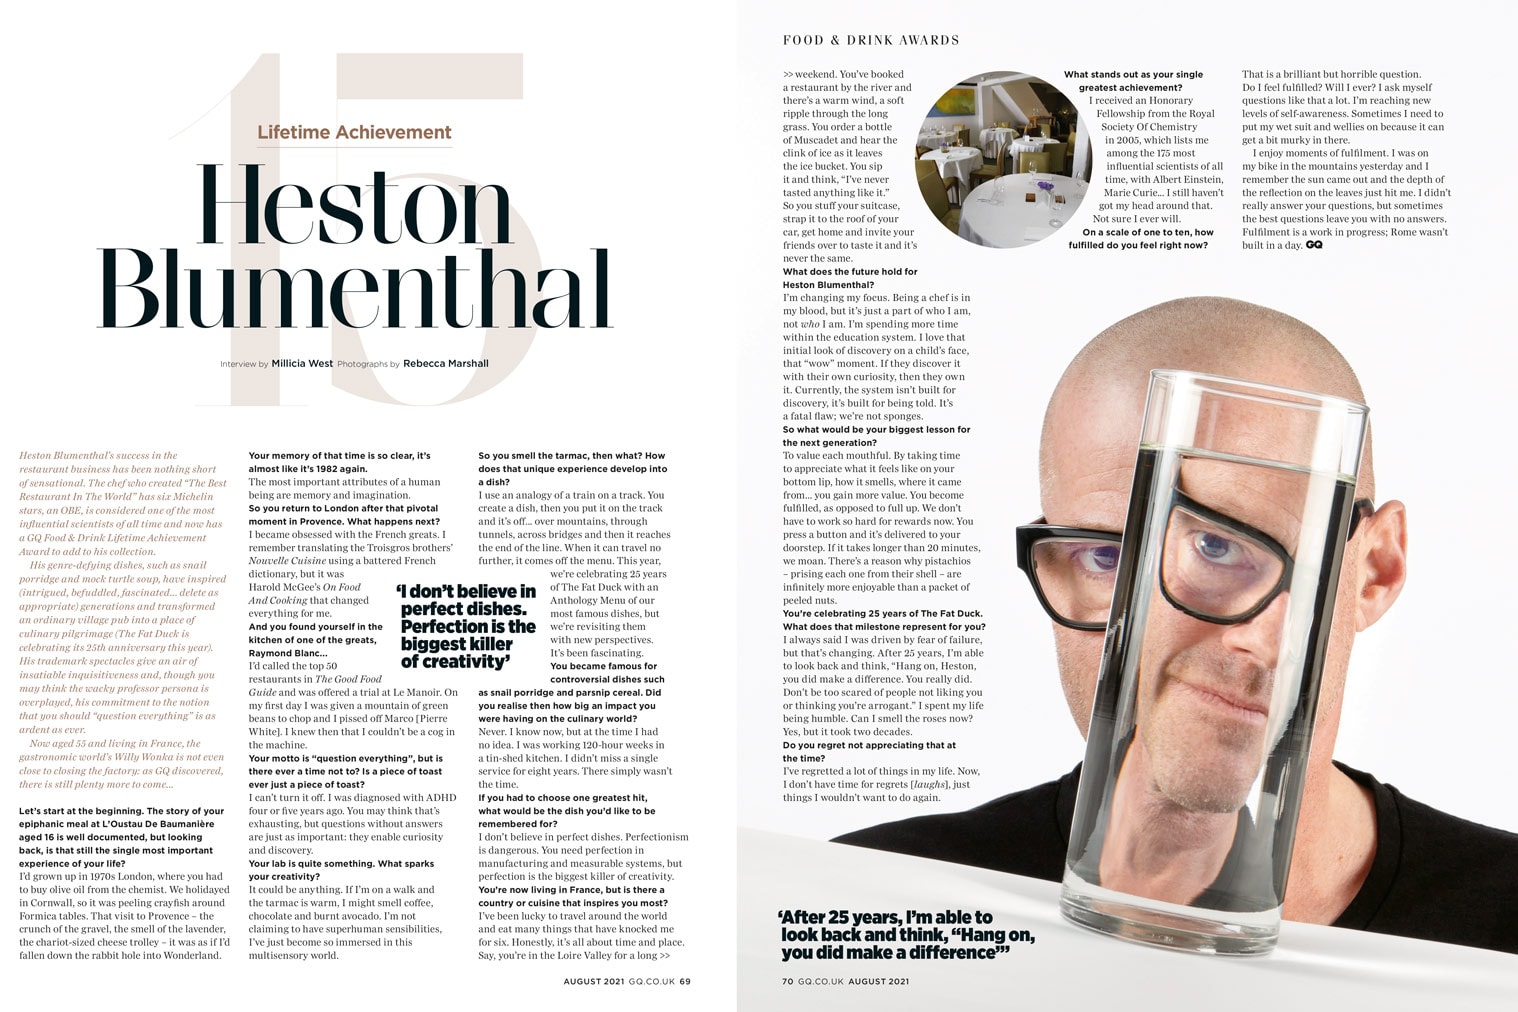 Double page spread from magazine showing feature artice on and photograph of Heston Blumenthal